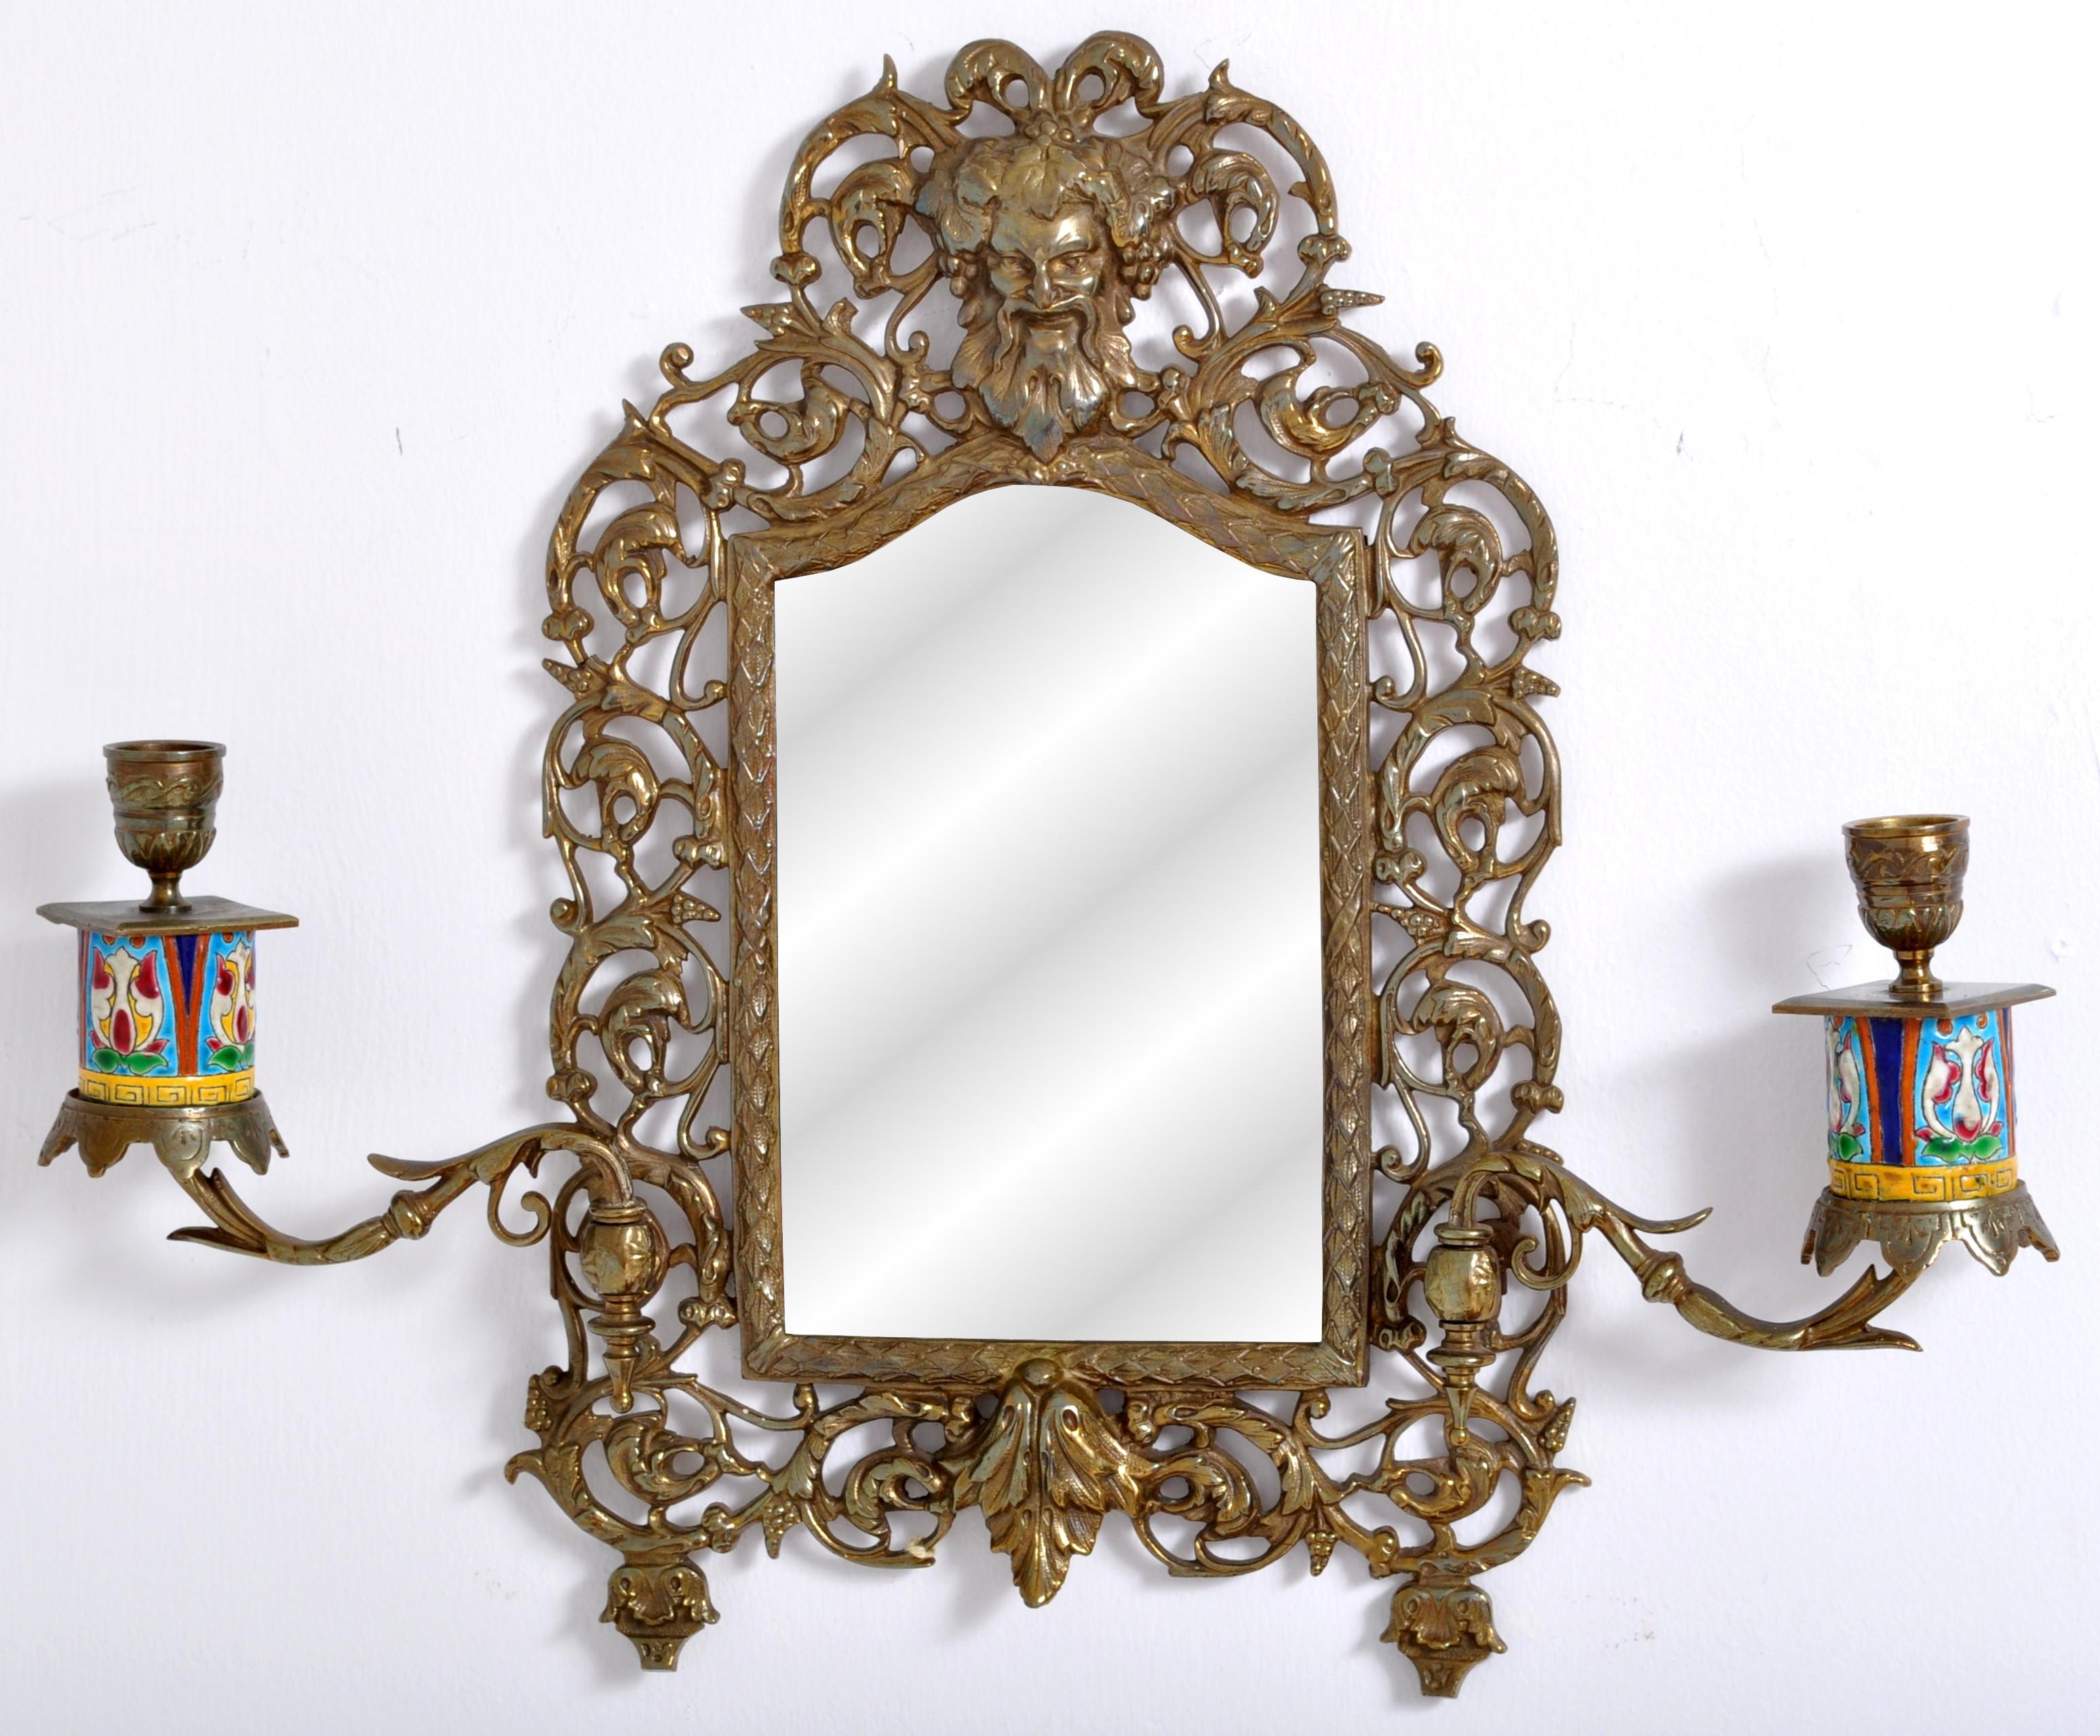 Antique neoclassical French brass wall mirror with candle sconces, circa 1890. The mirror having a pierced floral brass frame and mounted with a mask of the Roman God Bacchus, the frame enclosing a beveled arched mirror. The mirror having a pair of